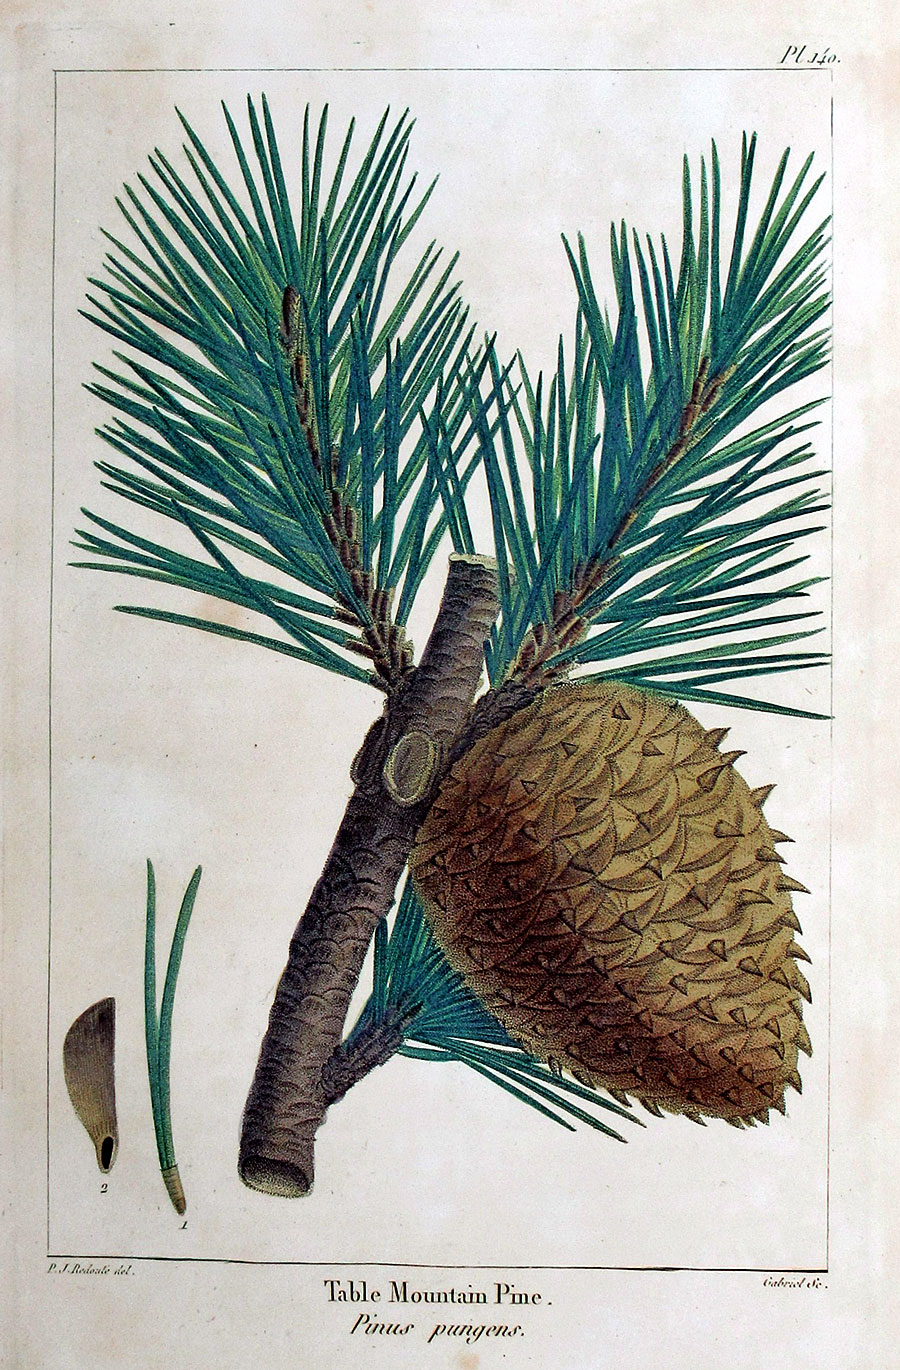 American Tree Leaves - 1857 - Michaux - Table Mountain Pine